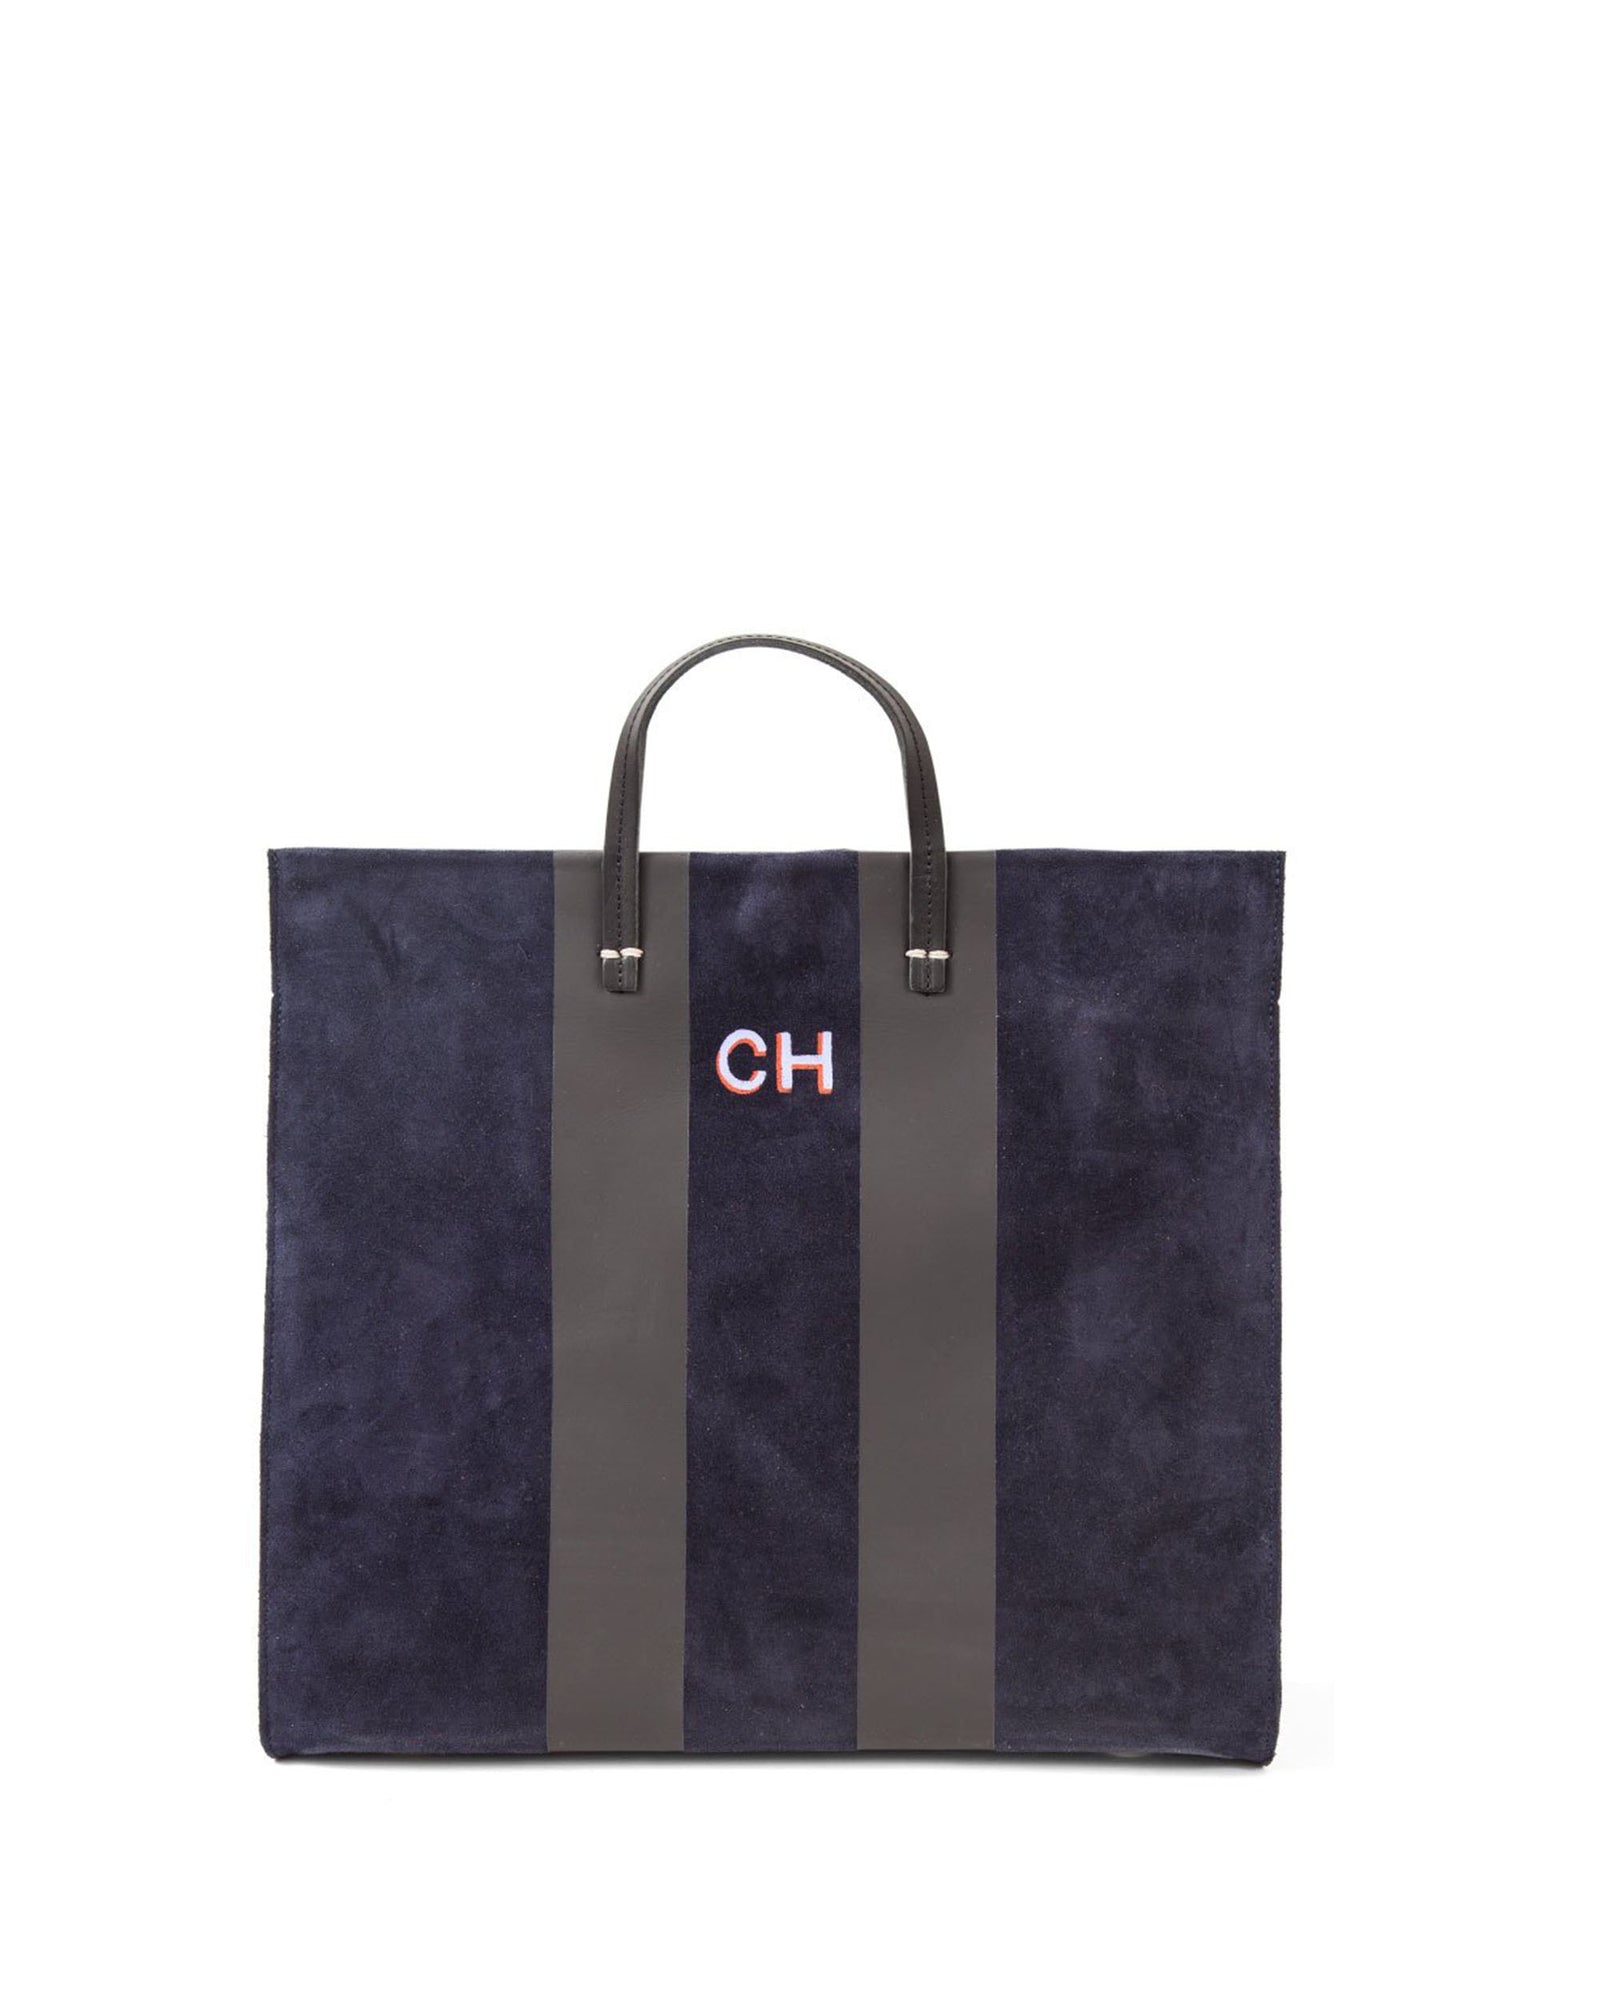 Simple Tote in Navy Suede with Racing Stripes with "CH" Hand-Painted Monogram